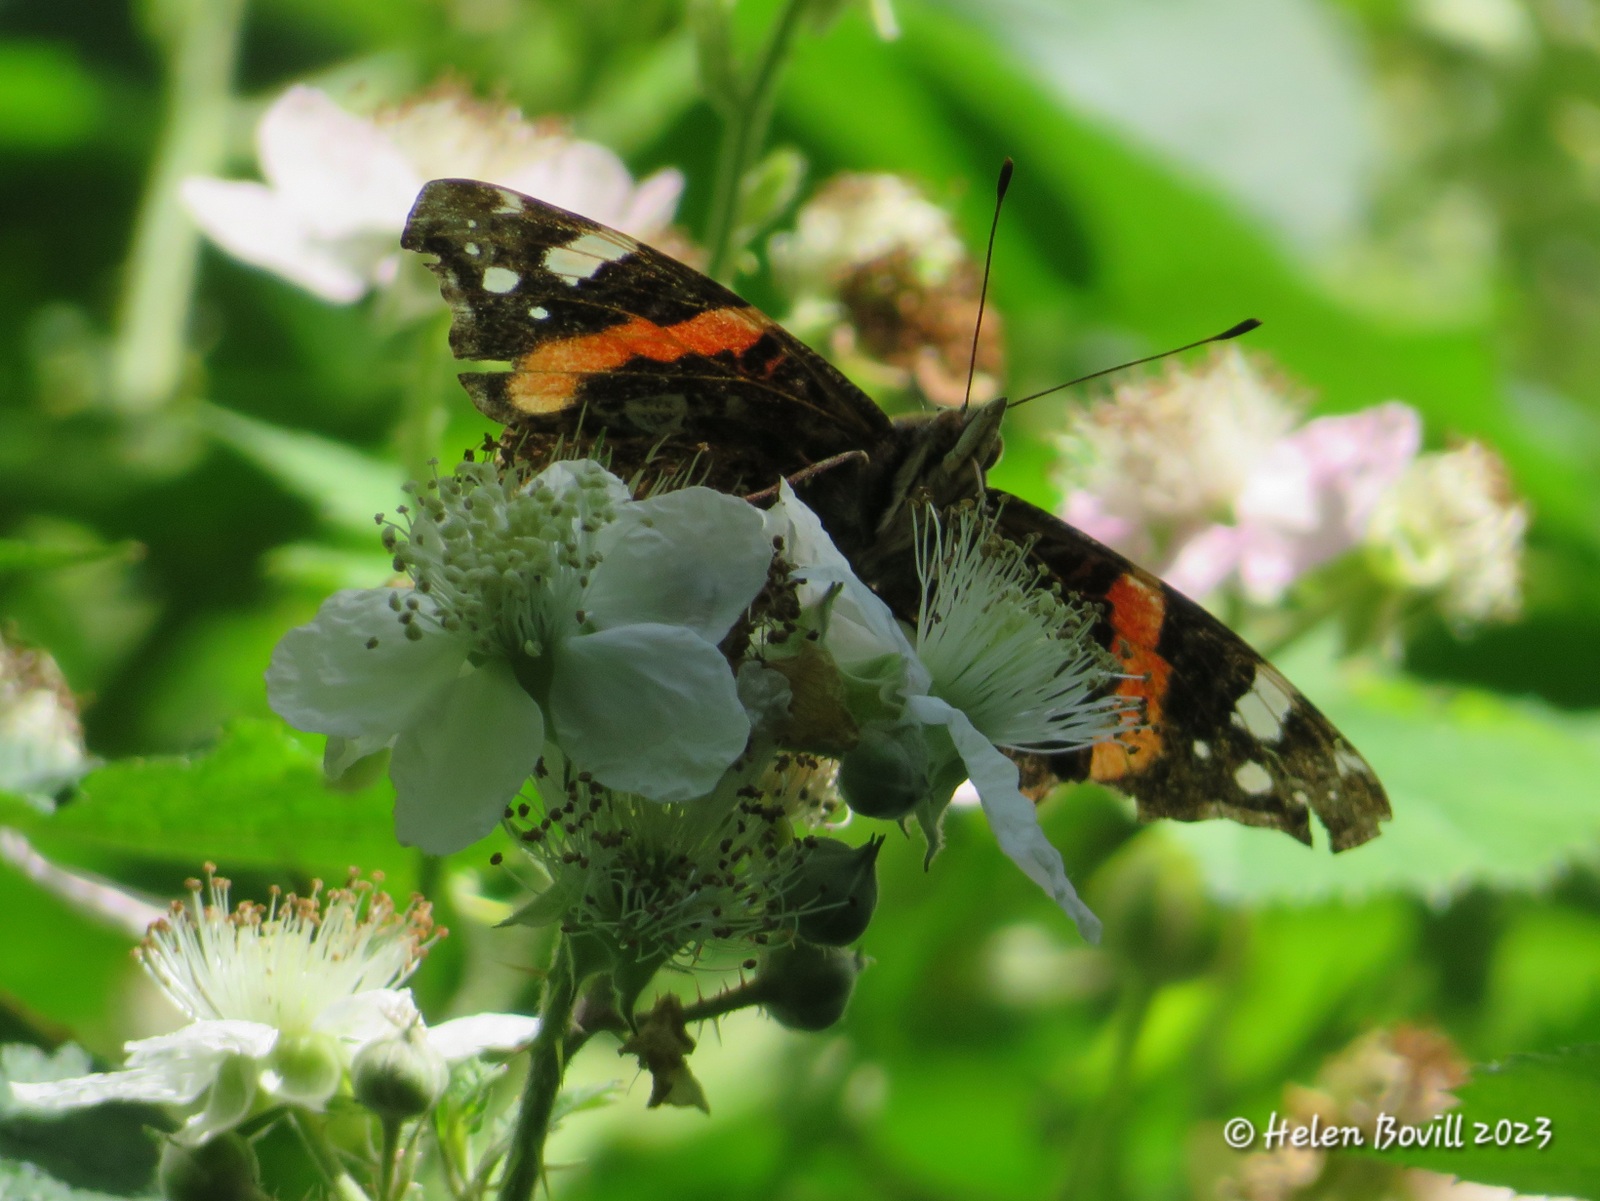 A Red Admiral Butterfly high up on some white Bramble flowers. Brambles are great food for the cemetery wildlife.